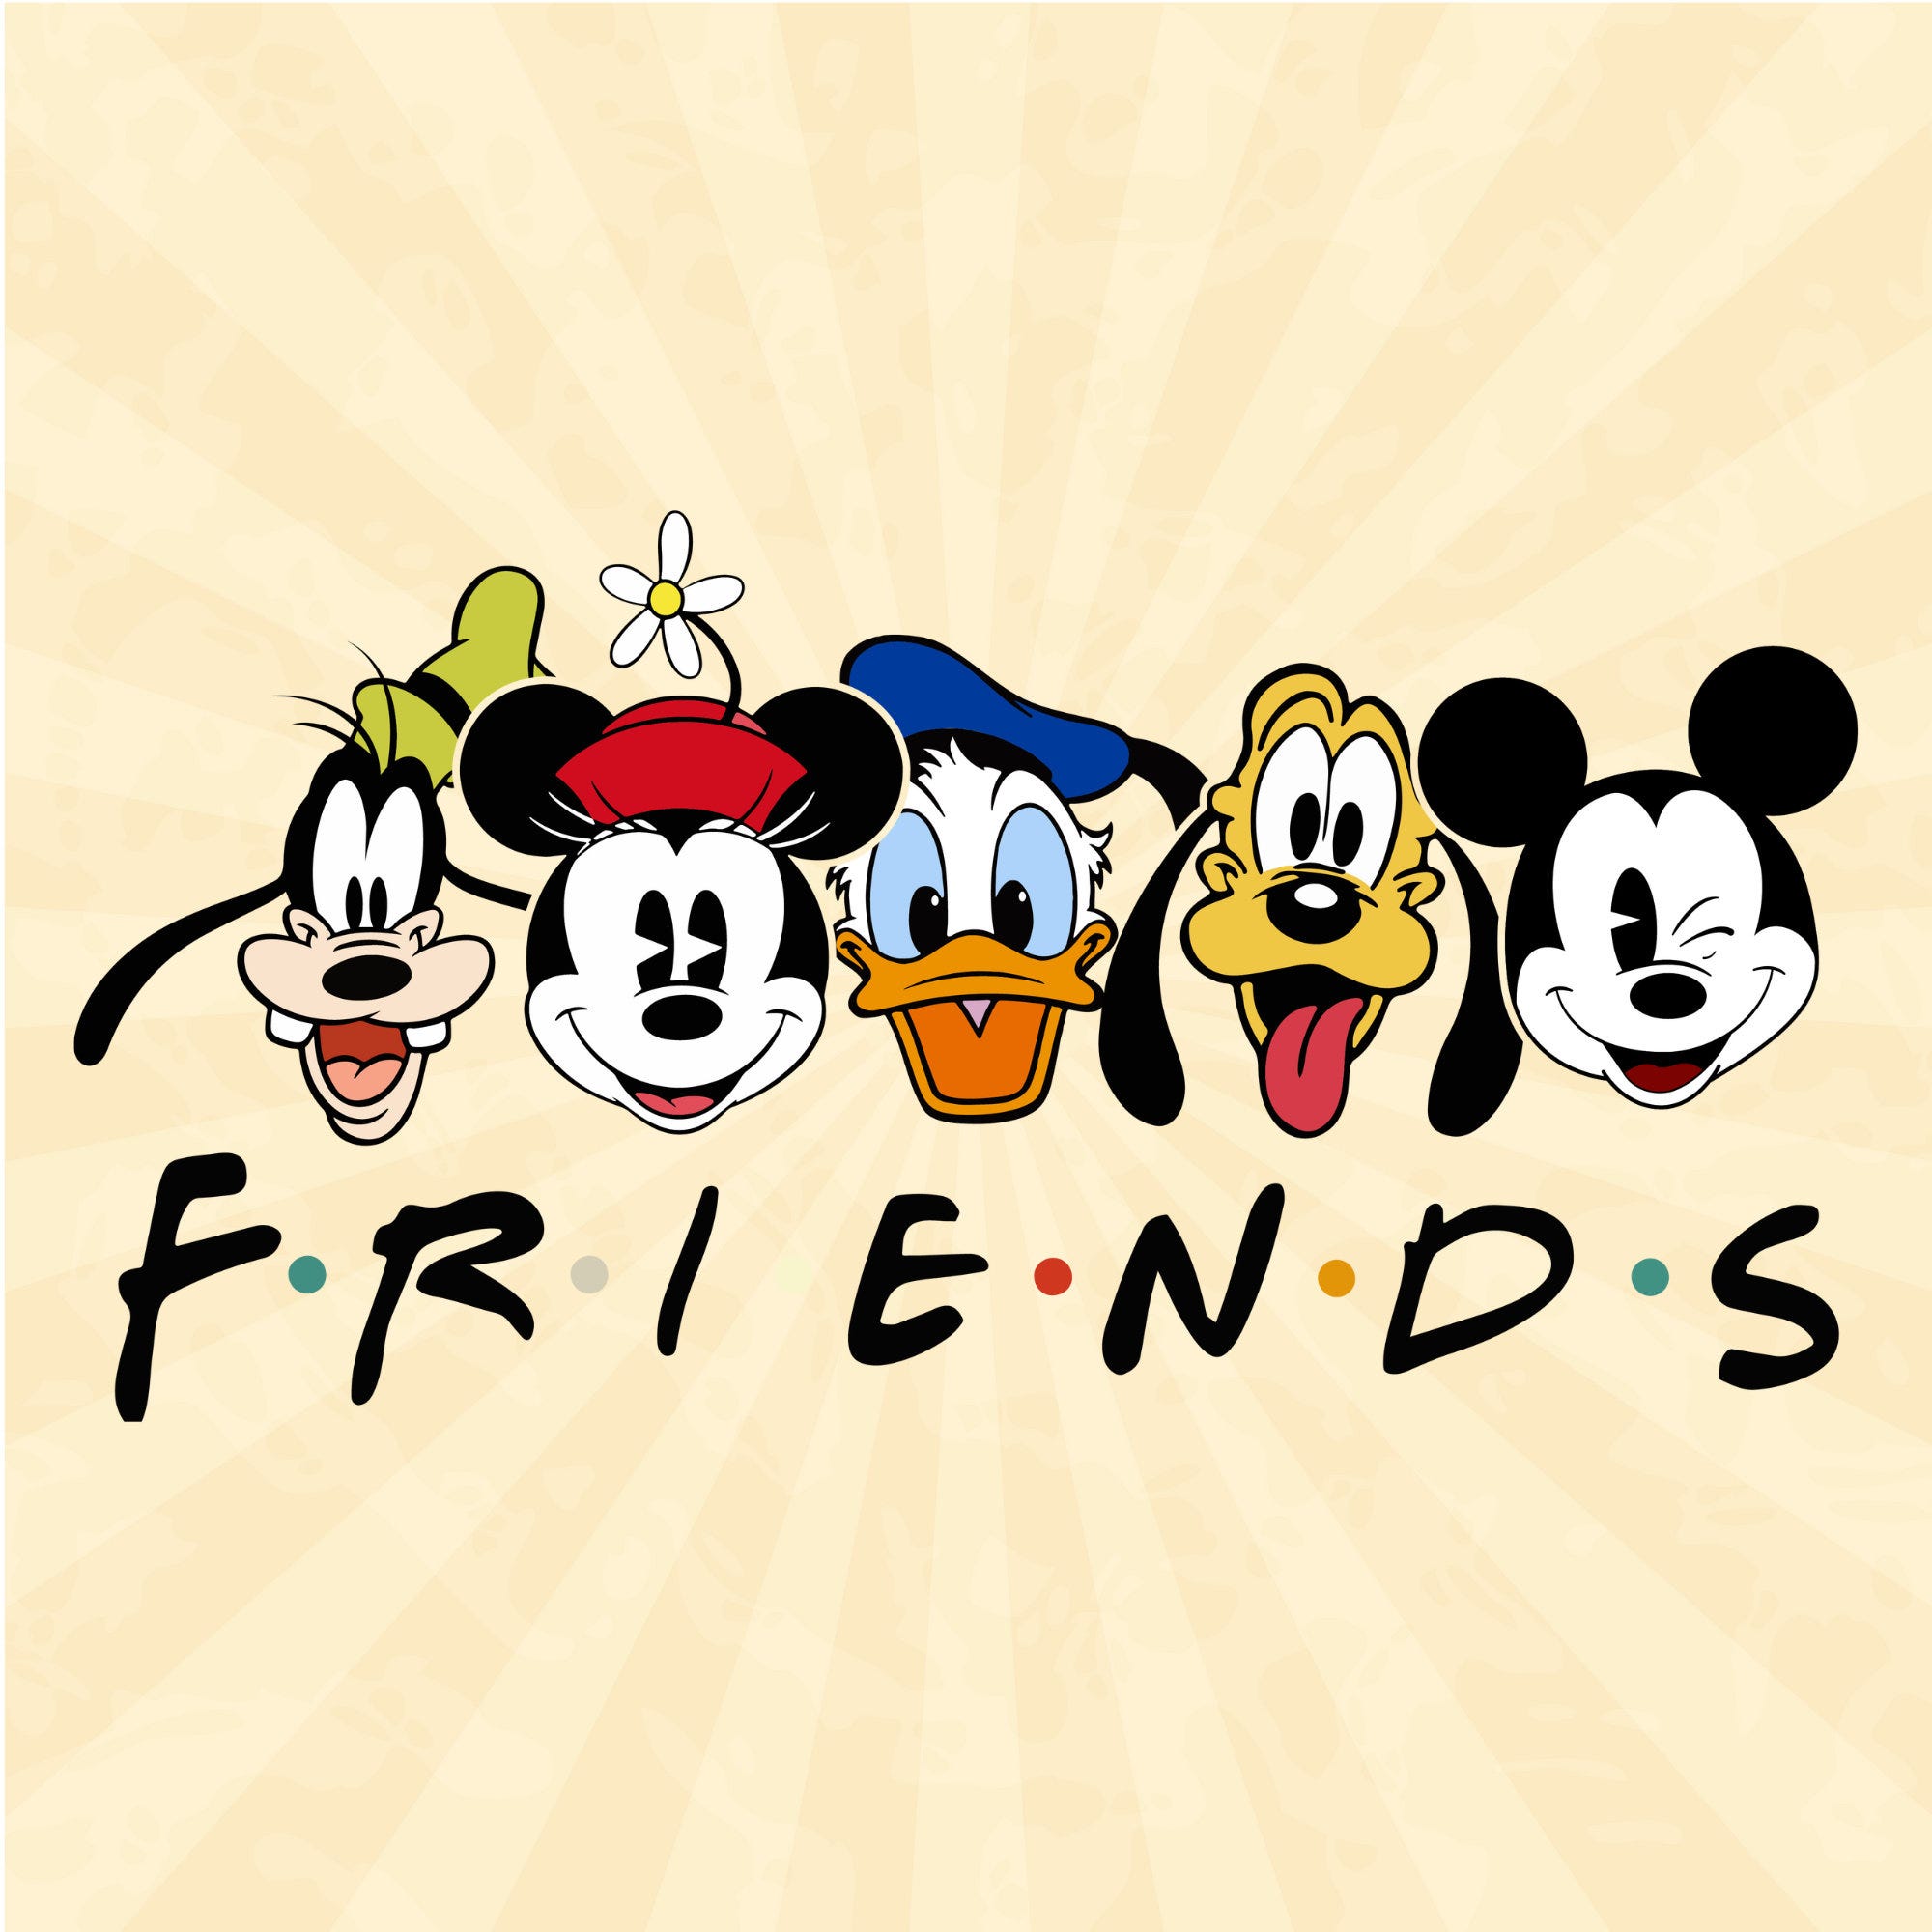 Mickey and friends svg, Mickey and friends png, Disneyfriends Svg, Vinyl Cut File, Svg, Pdf, Jpg, Png, Ai Printable Design File